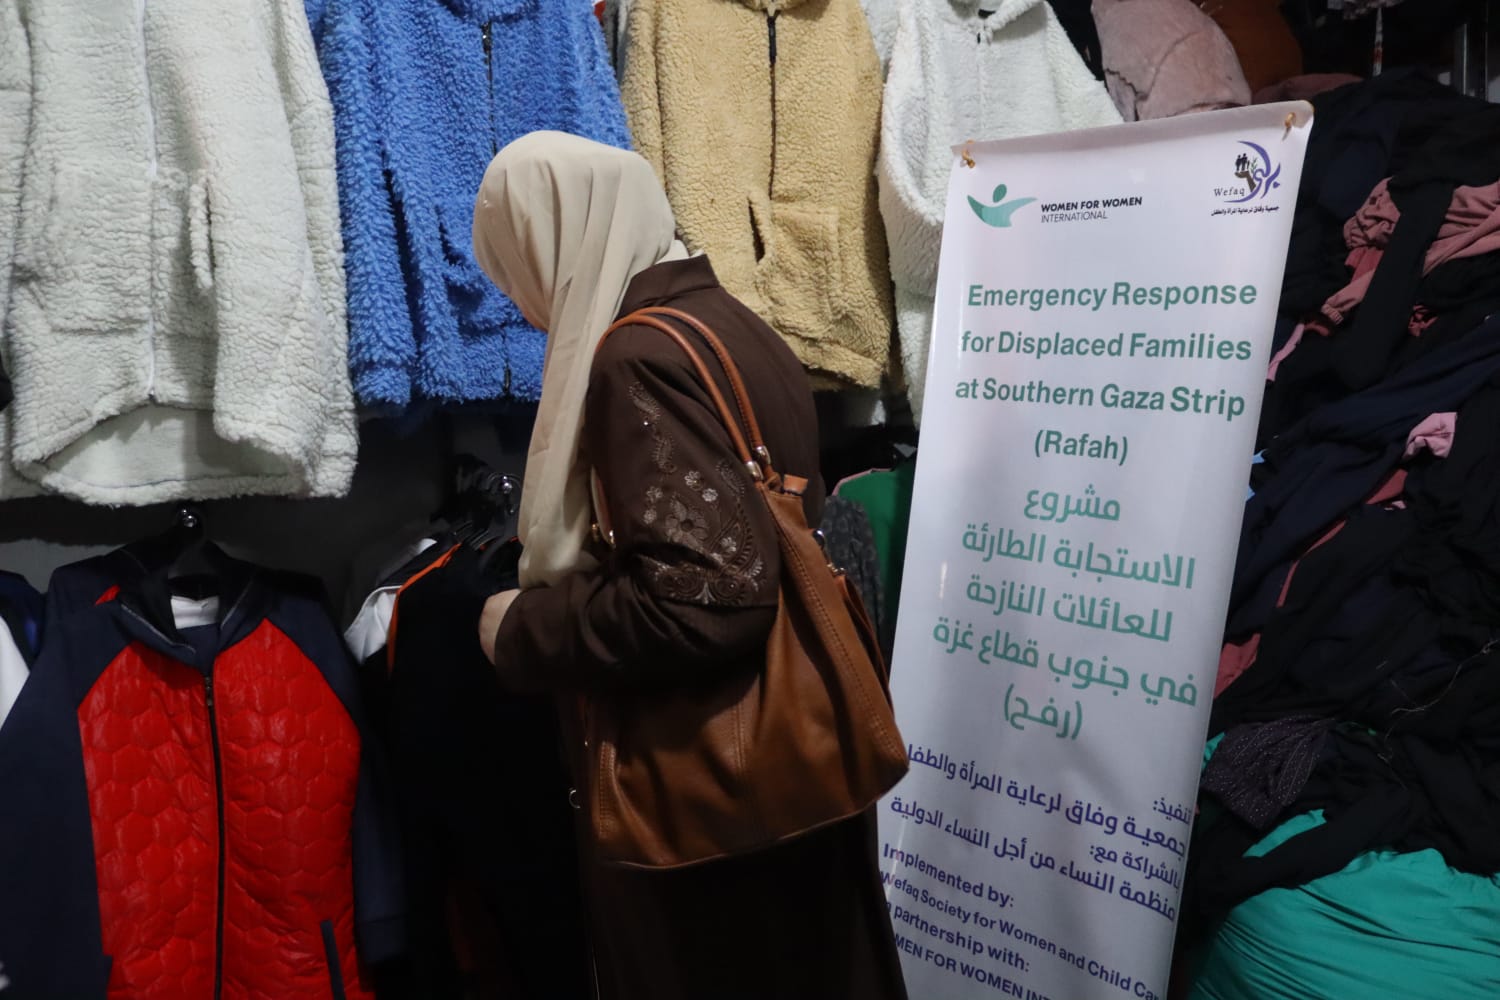 A woman browses for clothing for herself and her family. Although everything is provided for free via vouchers, the shopping experience restores dignity.